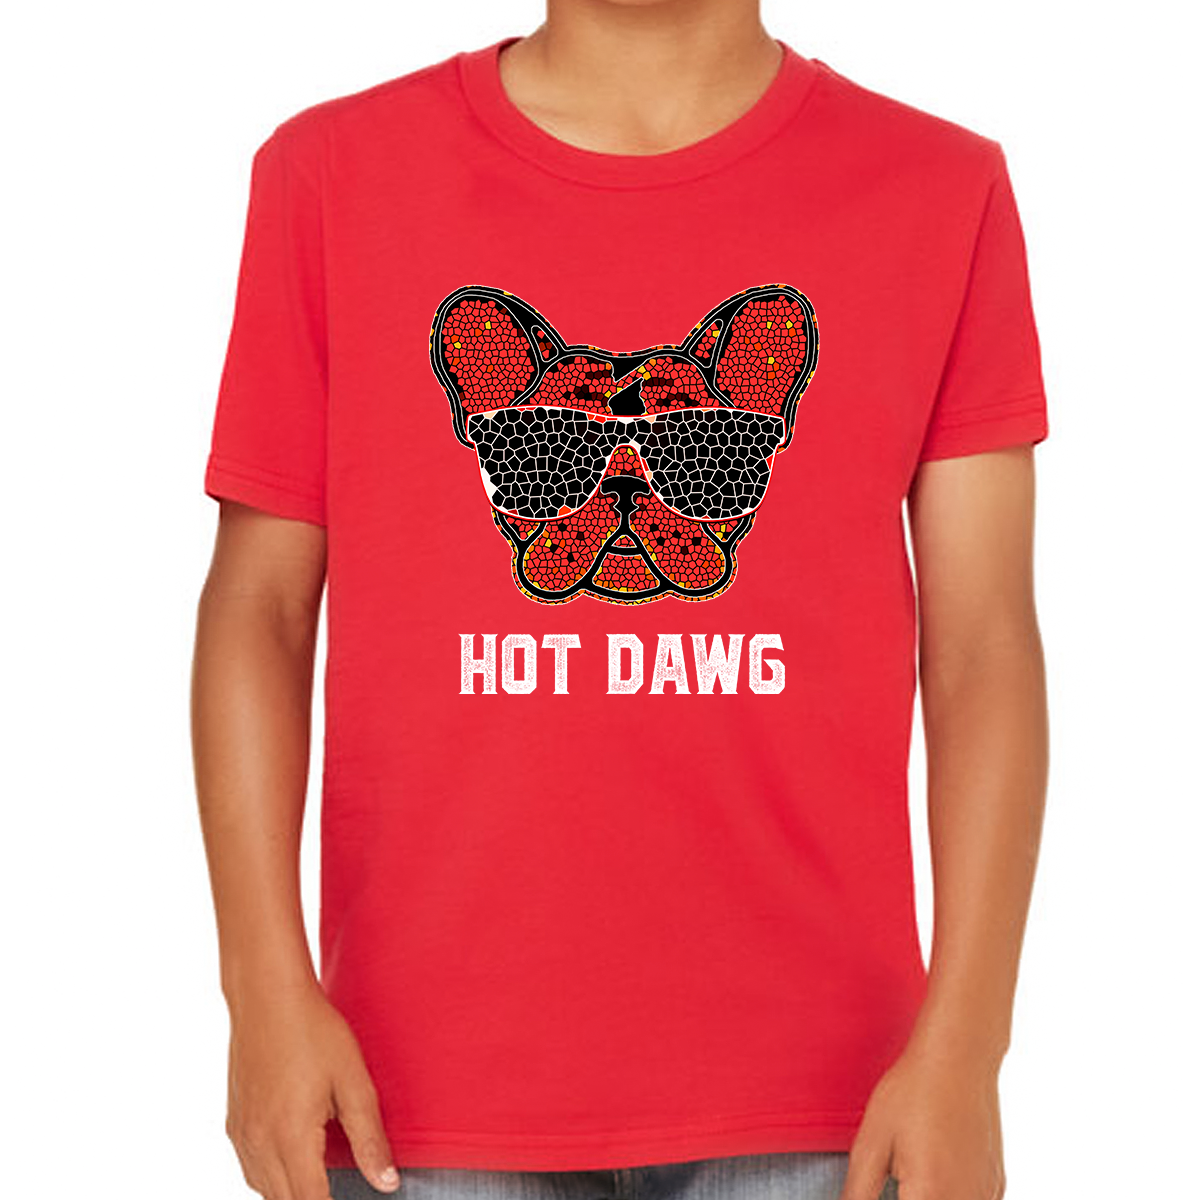 Hot Dog Shirt - Red Dog Shirts for Boys - Dog Gifts for Boys - Kids Dog Lover Shirts - Fire Fit Designs